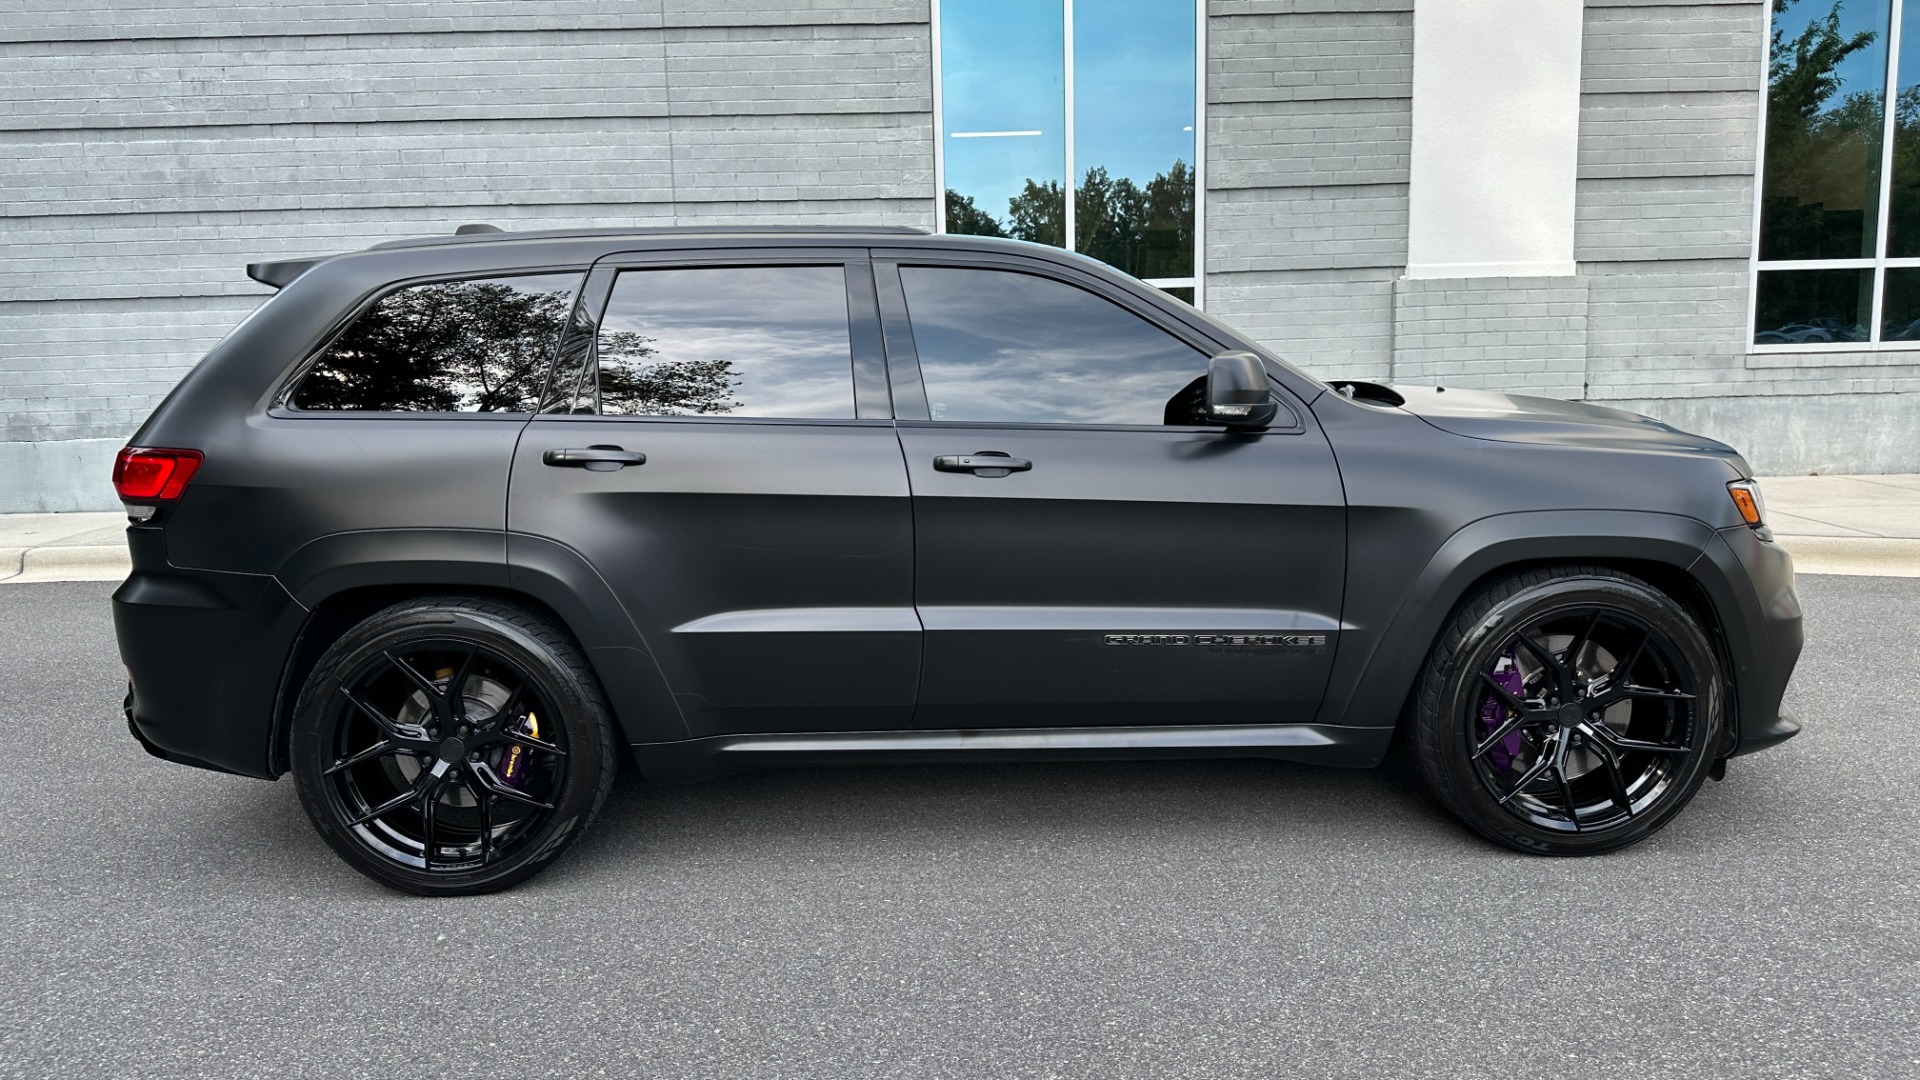 Used 2021 Jeep Grand Cherokee TRACKHAWK / SUPERCHARGED / STARLIGHT HEADLINER / VOSSEN WHEELS for sale $90,495 at Formula Imports in Charlotte NC 28227 3